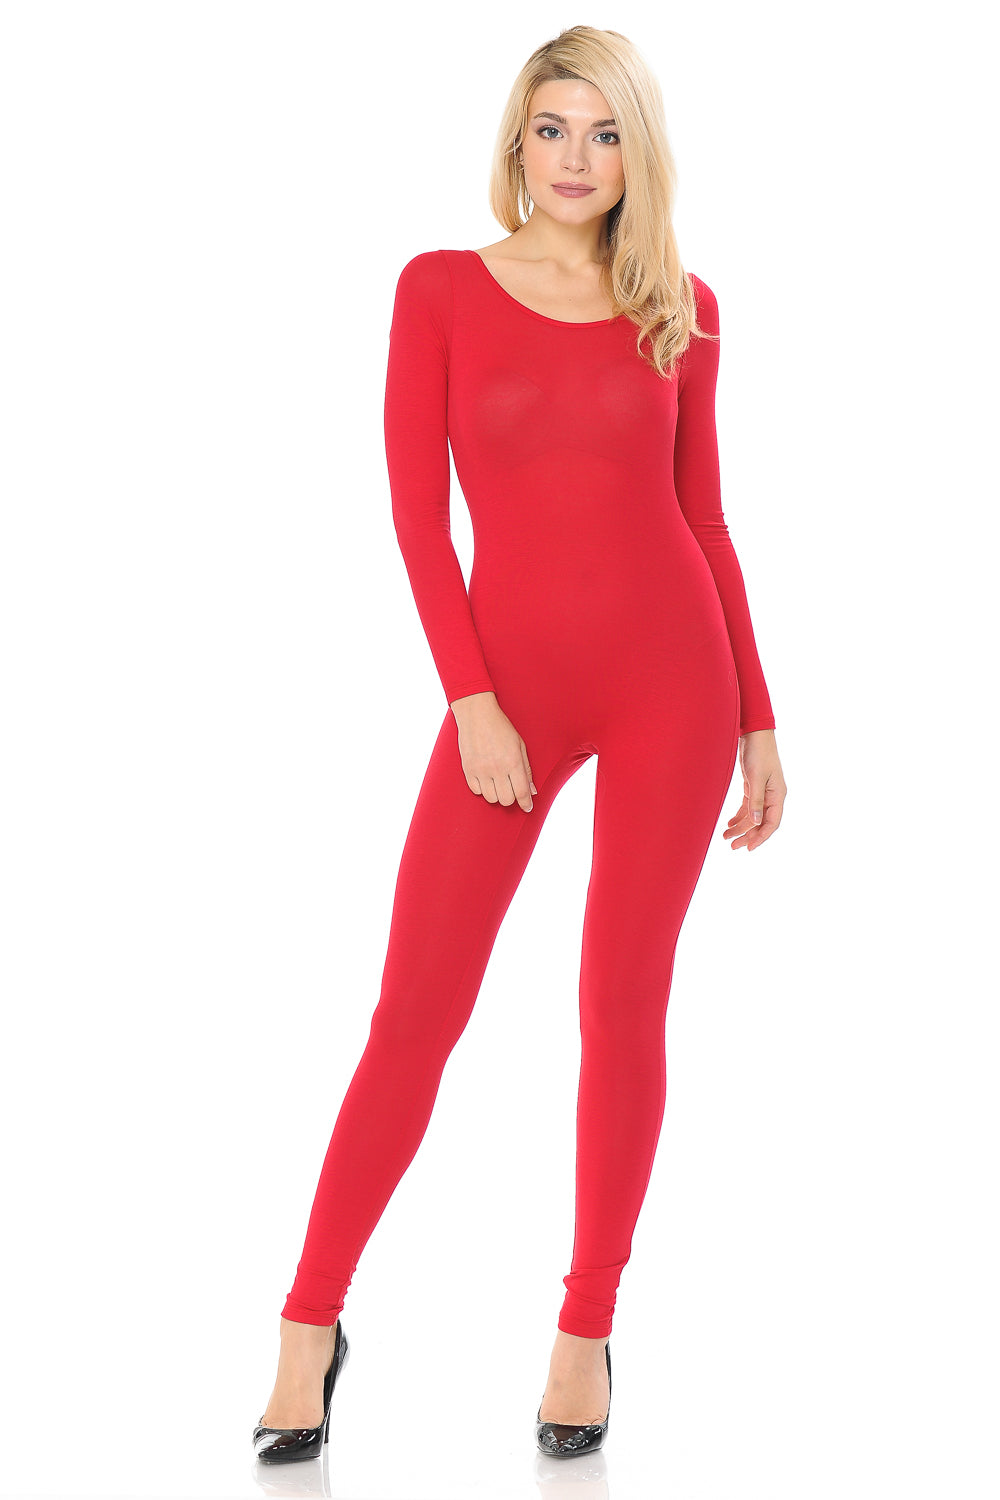 7Wins JJJ Fashion Women's Cotton Long Sleeve Catsuit Yoga Jumpsuit / Made in USA